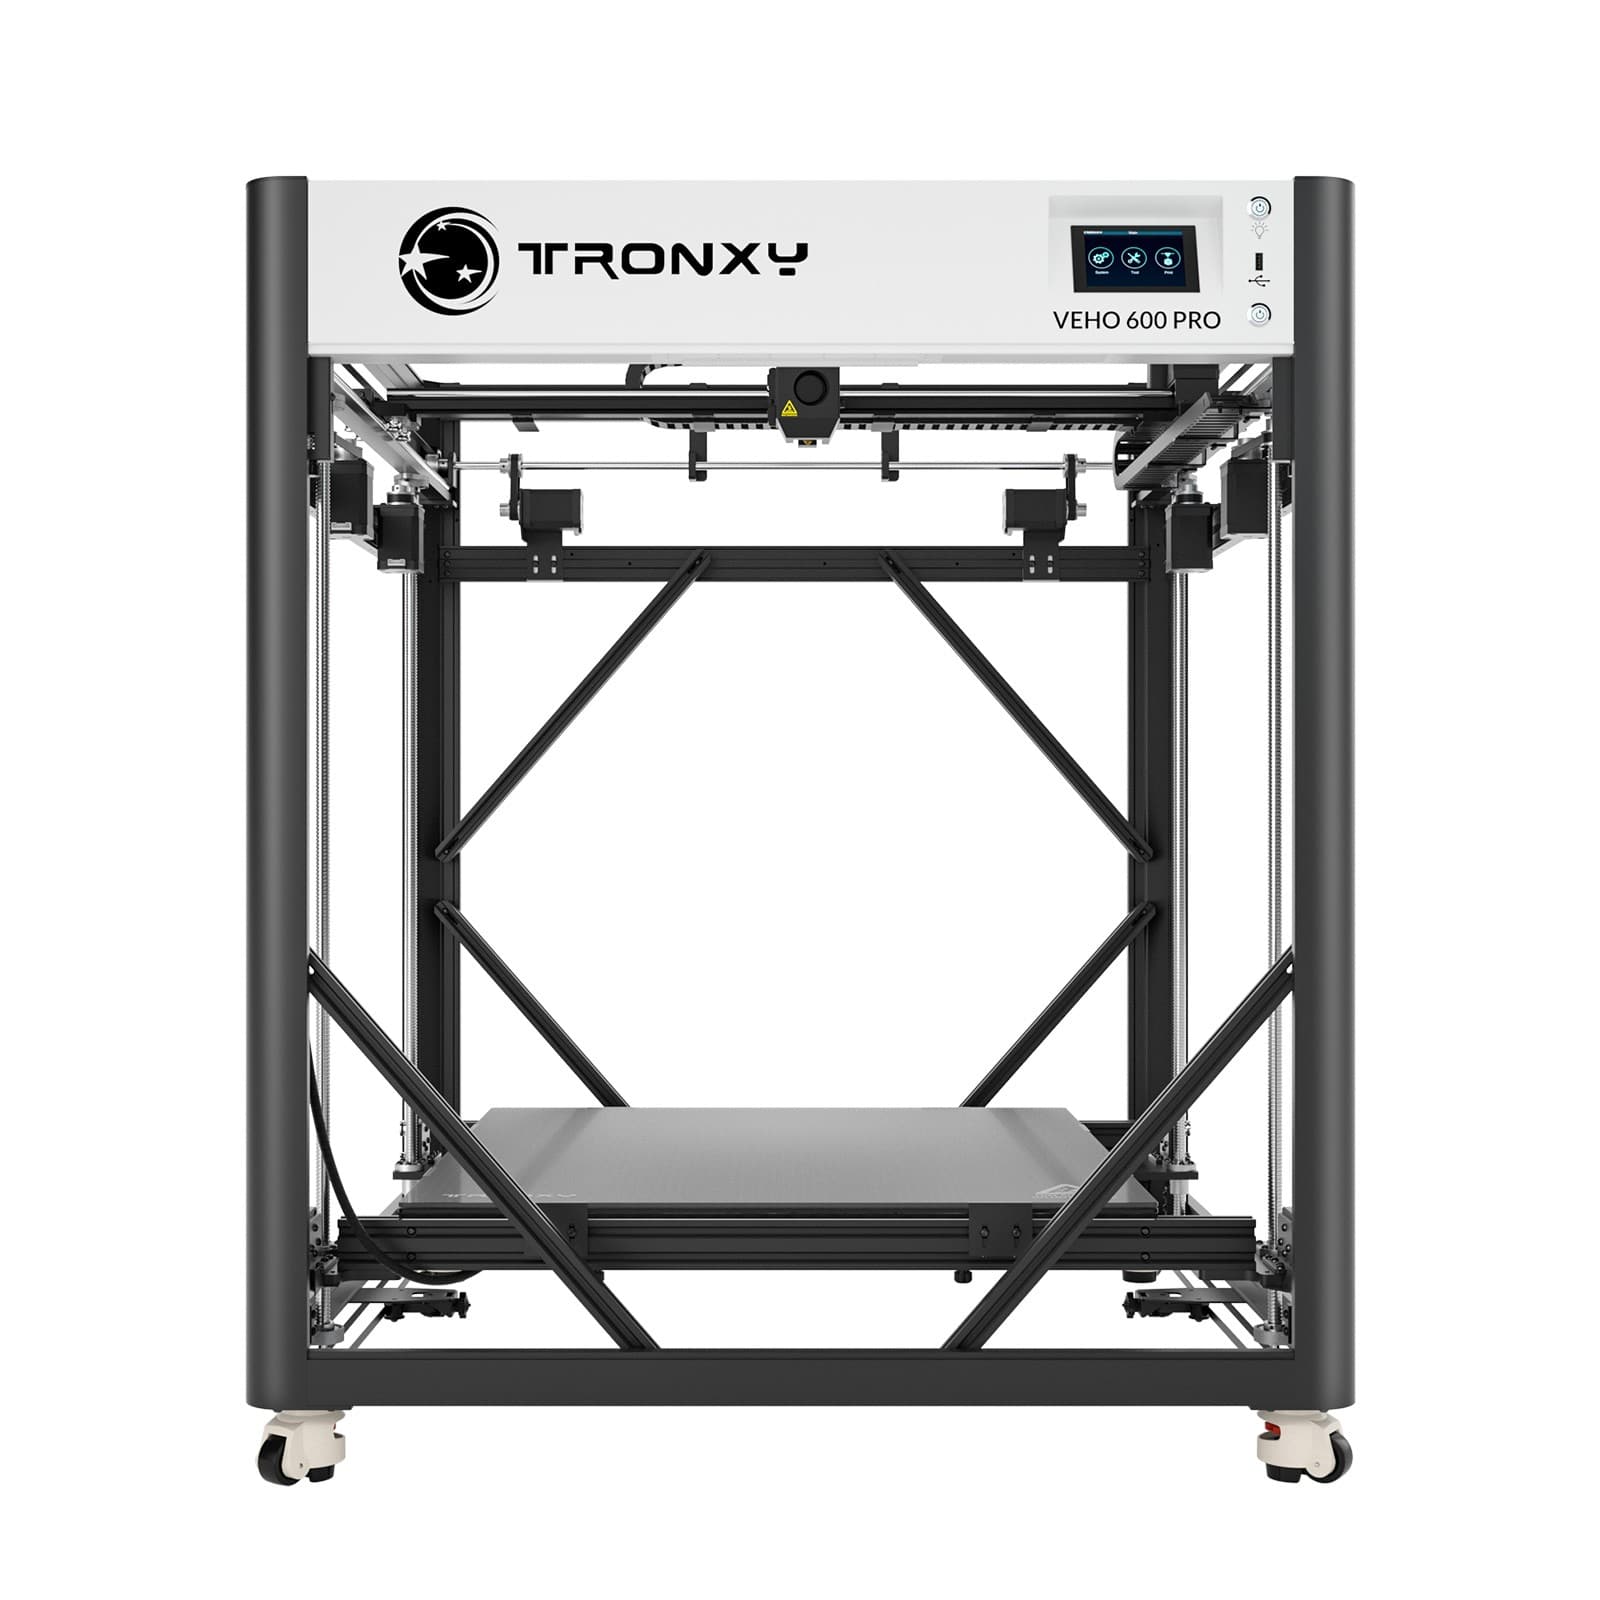 VEHO 600 PRO 3D Printer wholesale,Wolrdwide Shipping, direct contact the seller to get the quotation